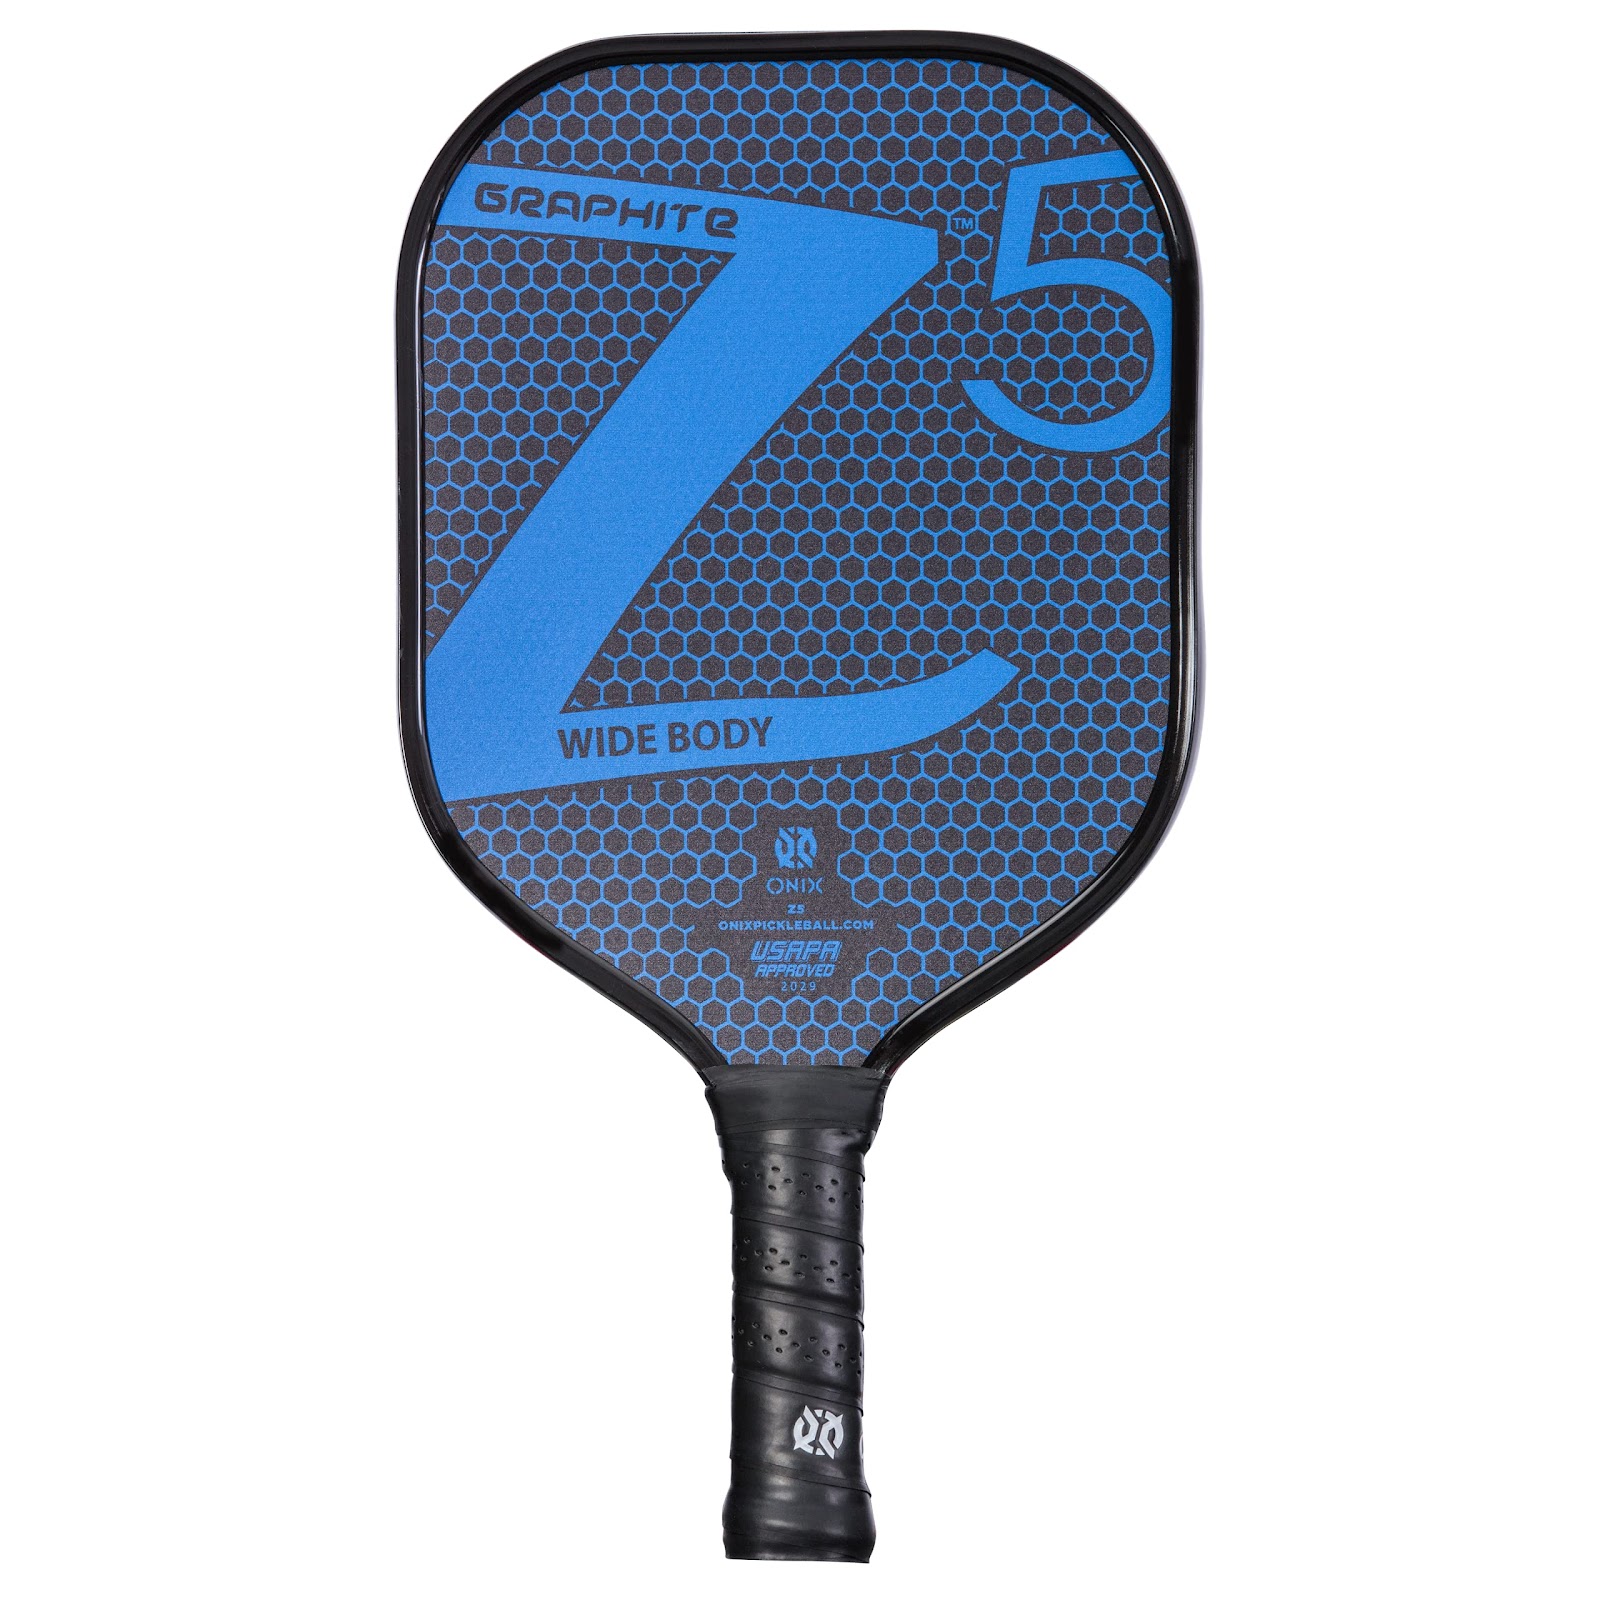 ONIX Graphite Z5 Graphite Carbon Fiber Pickleball Paddles With Cushion Comfort Pickleball Paddle Grip - USA Pickleball Approved Blue Paddle